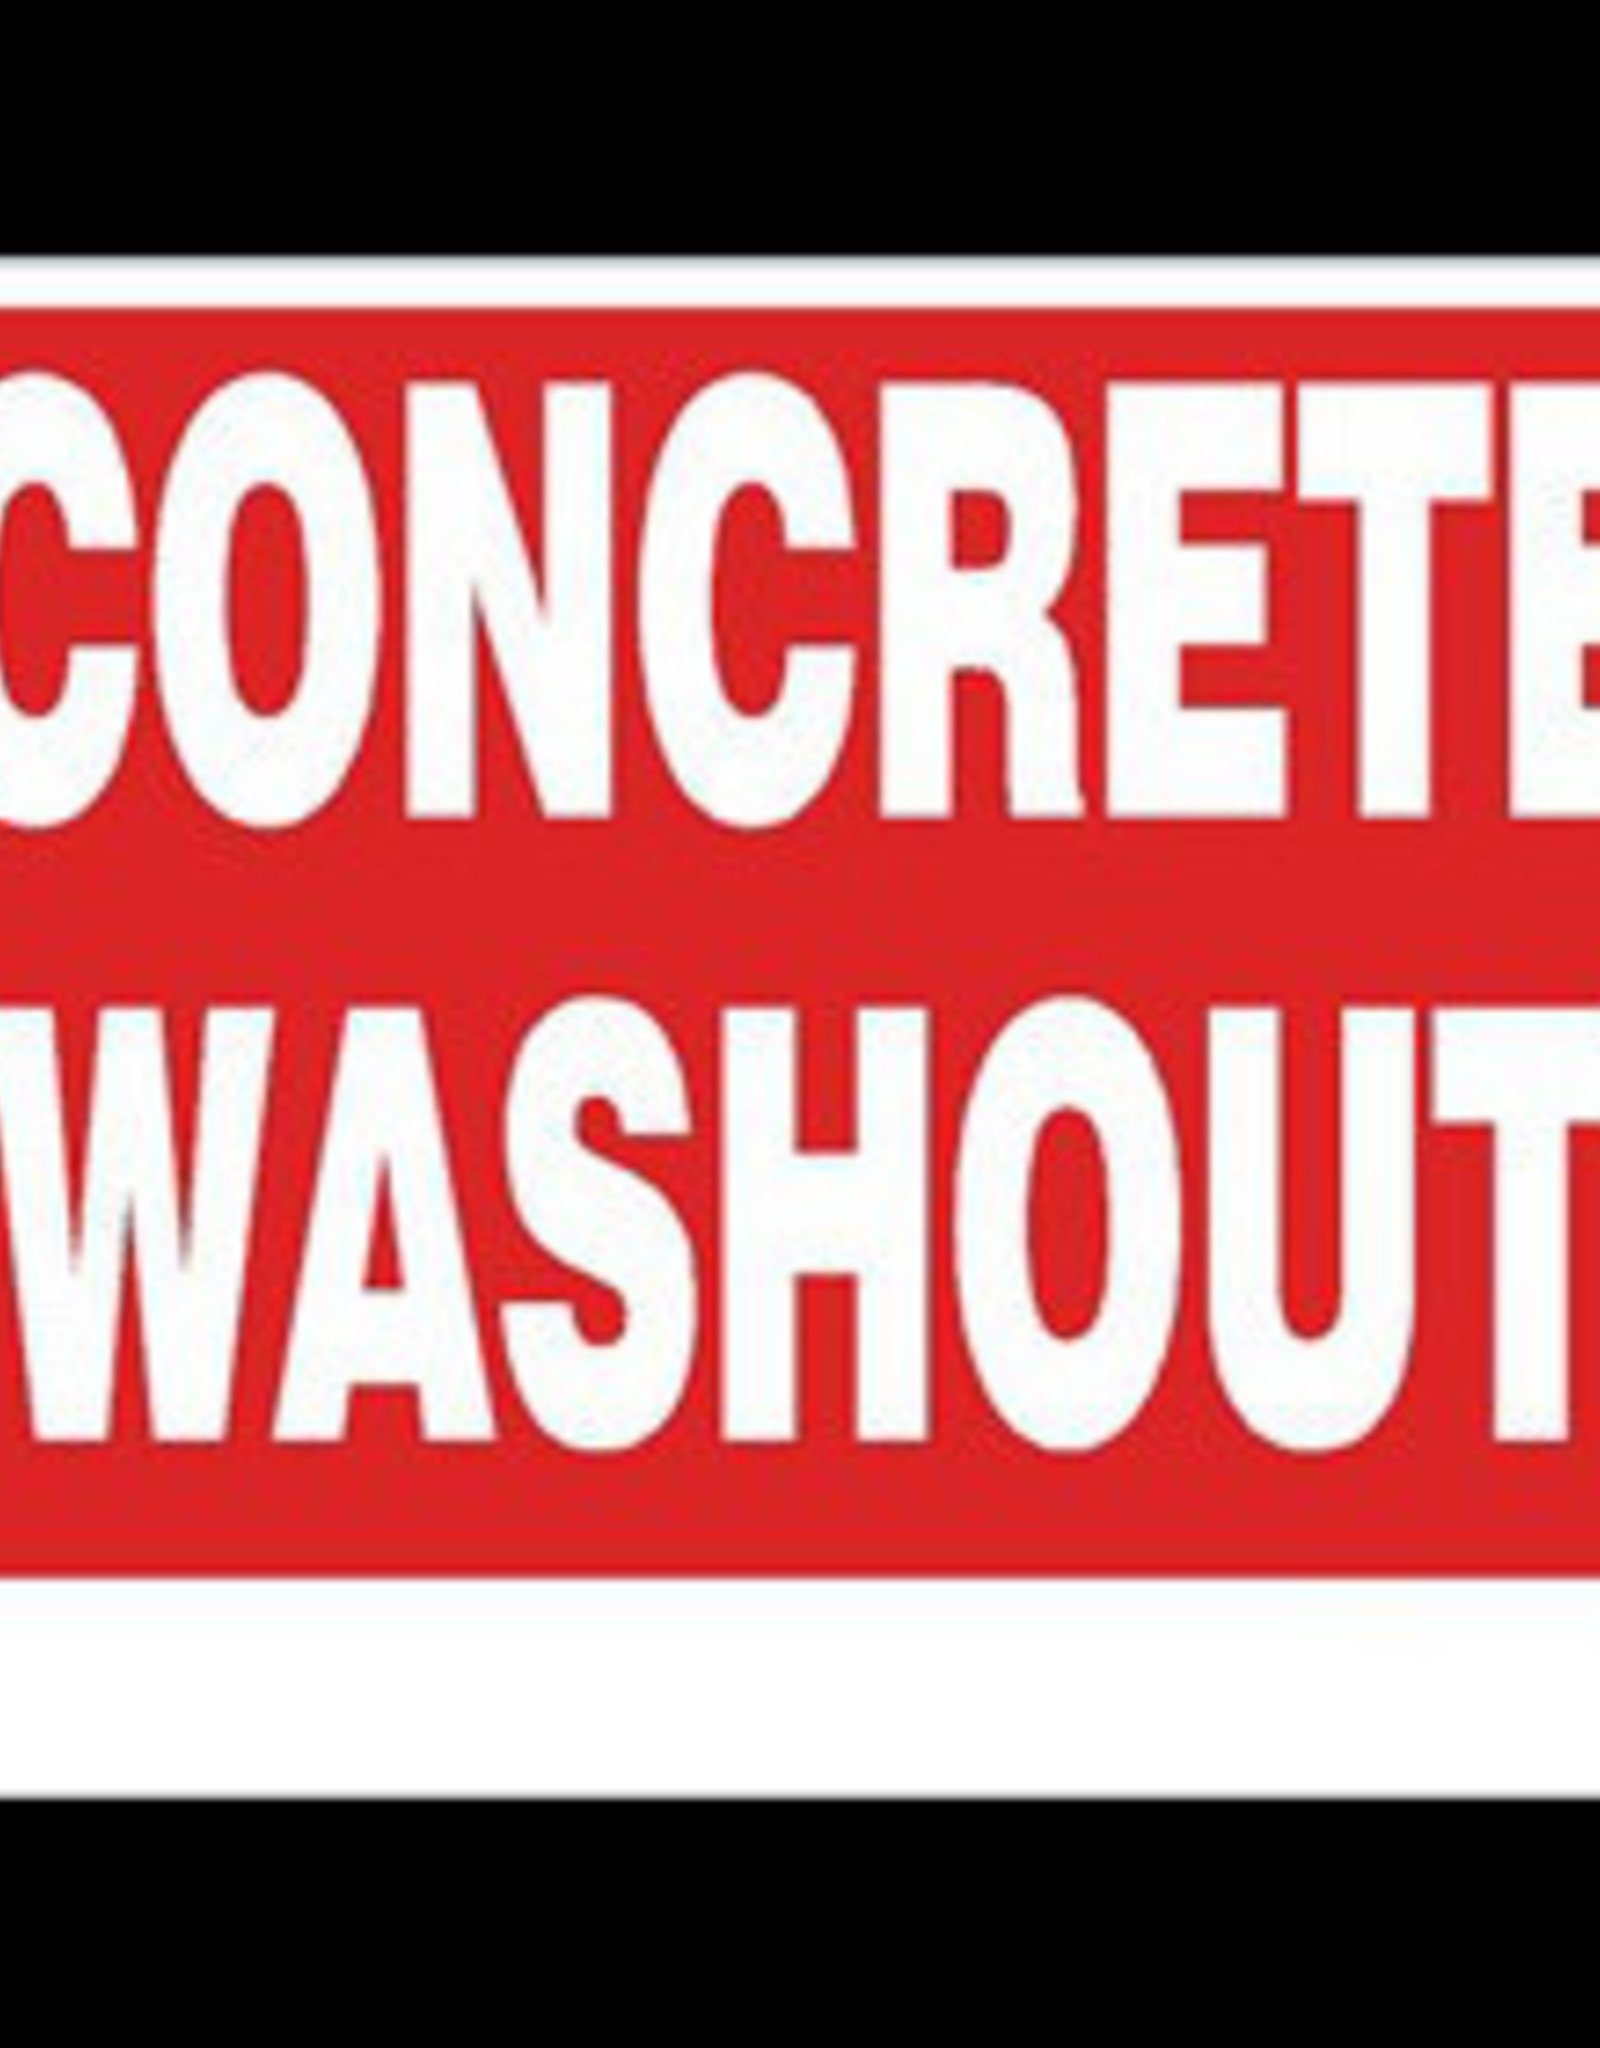 Concrete Washout Sign, Single Sided